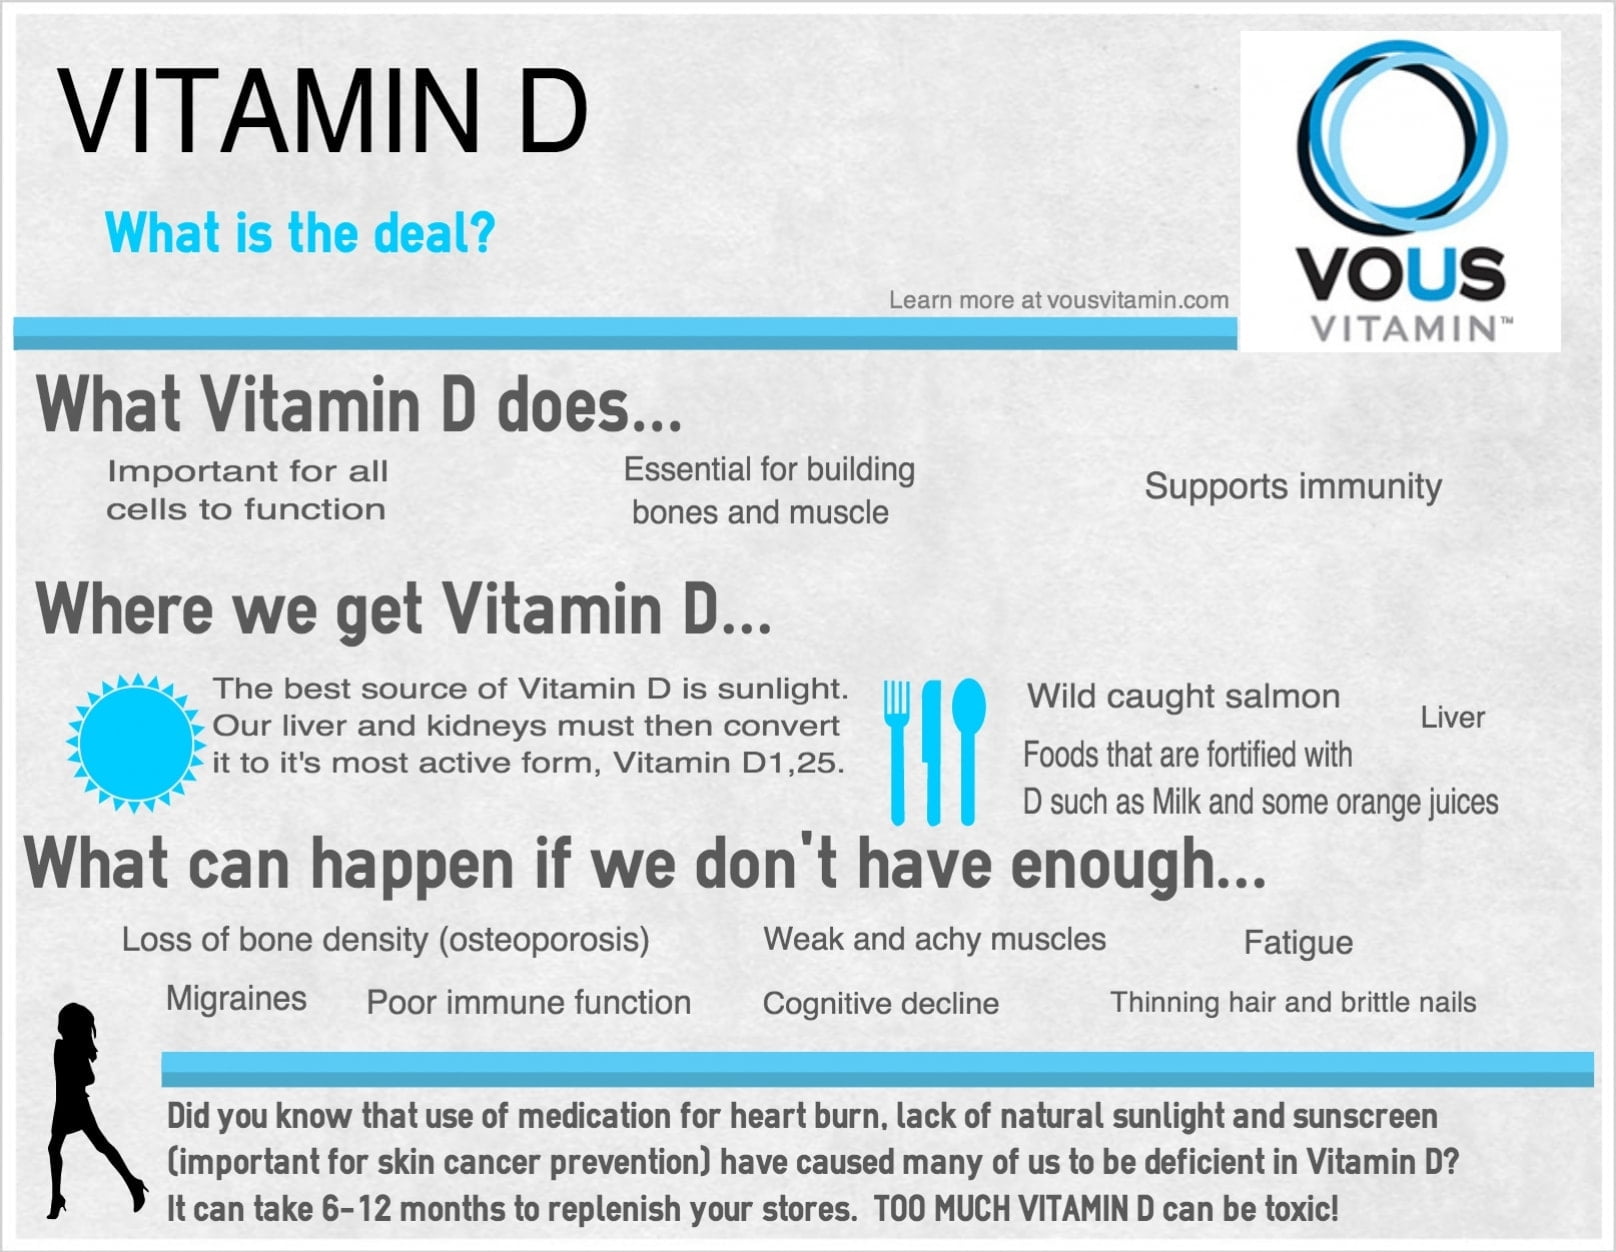 What are the side effects of low vitamin D levels?